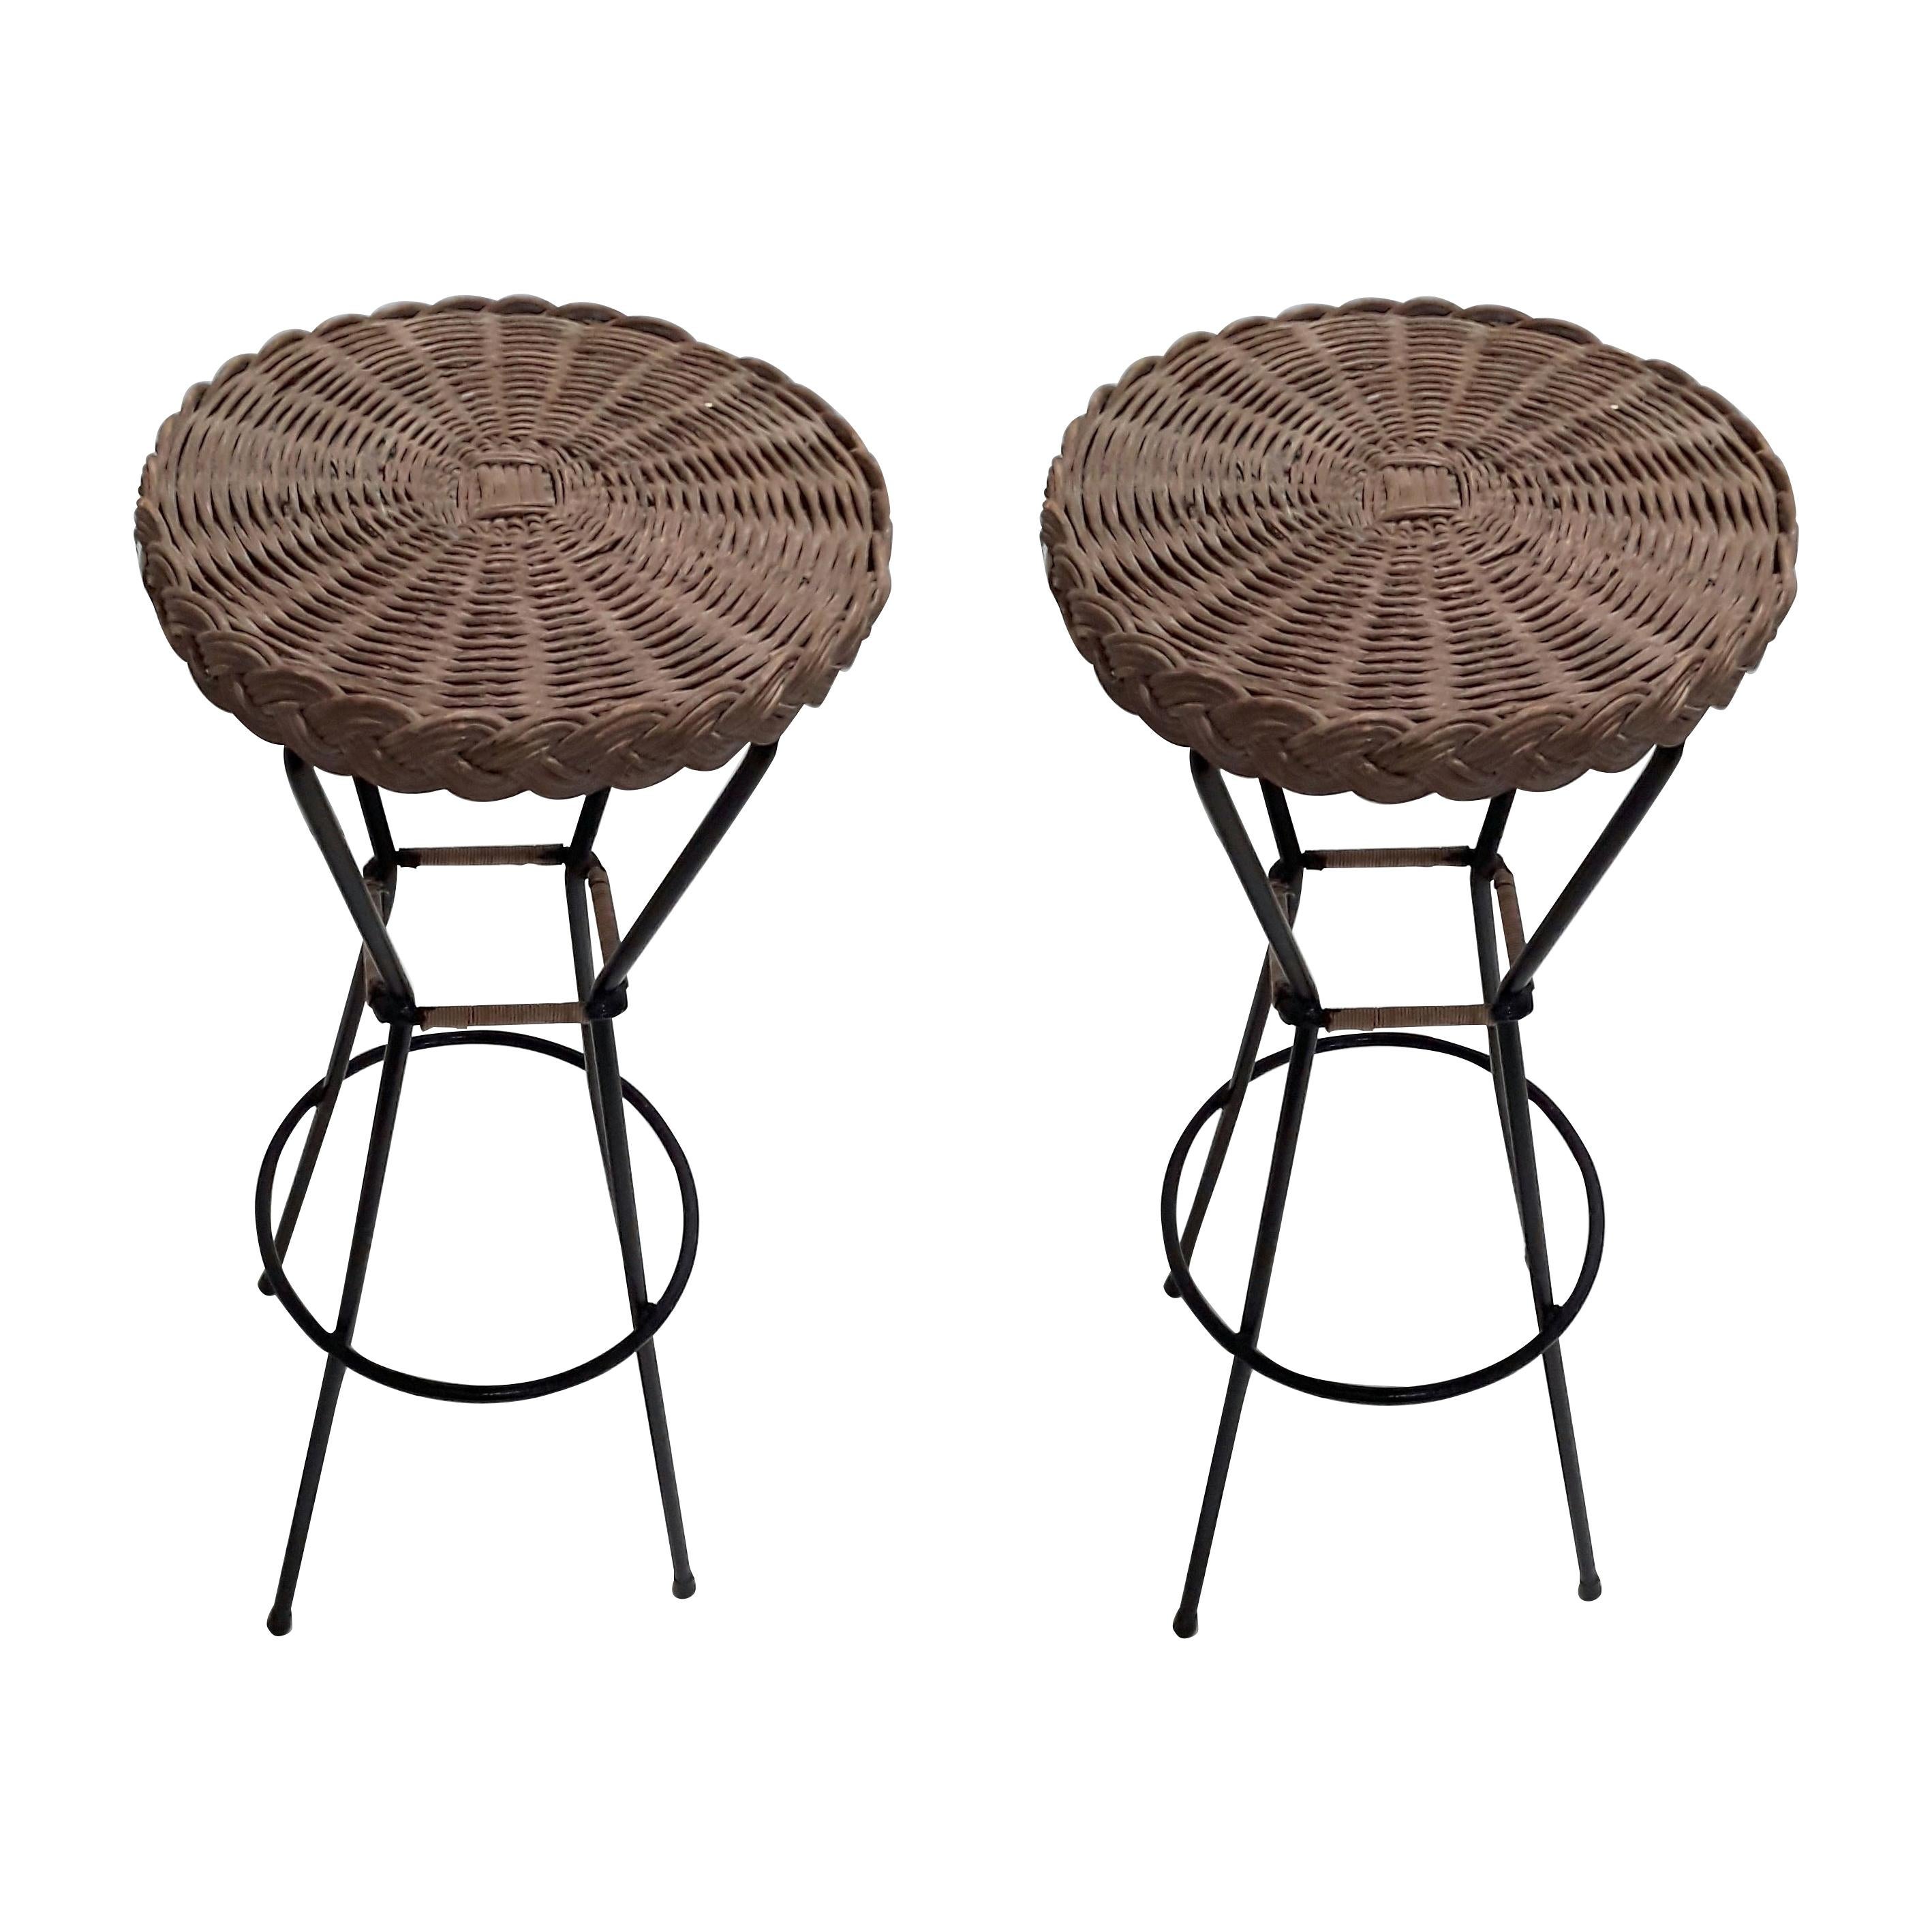 Pair of 1960s French Rattan Bar Stools on Black Metal Frames